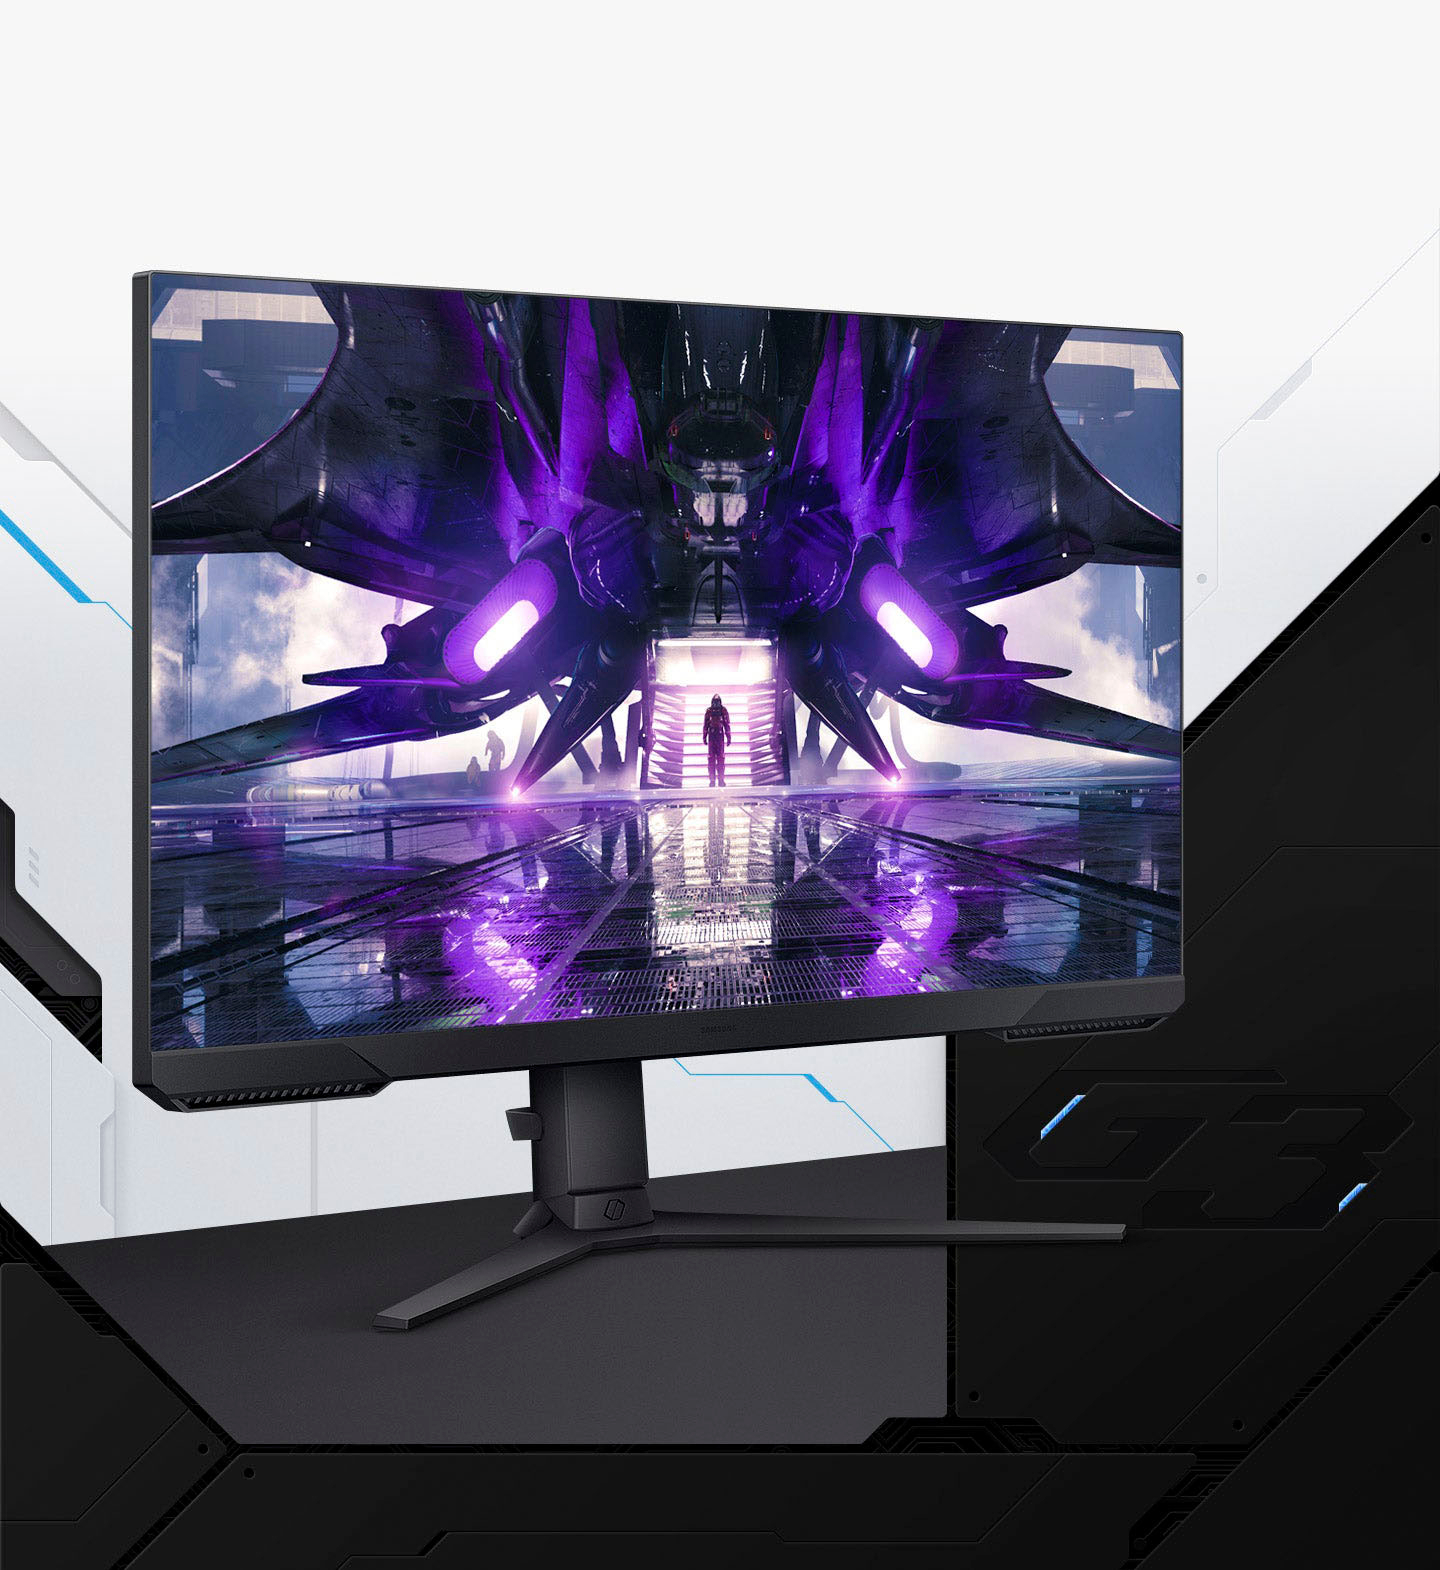 Samsung Odyssey G3 24inch 144hz 1ms Response Time Gaming Monitor - Best  Budget Monitor? 